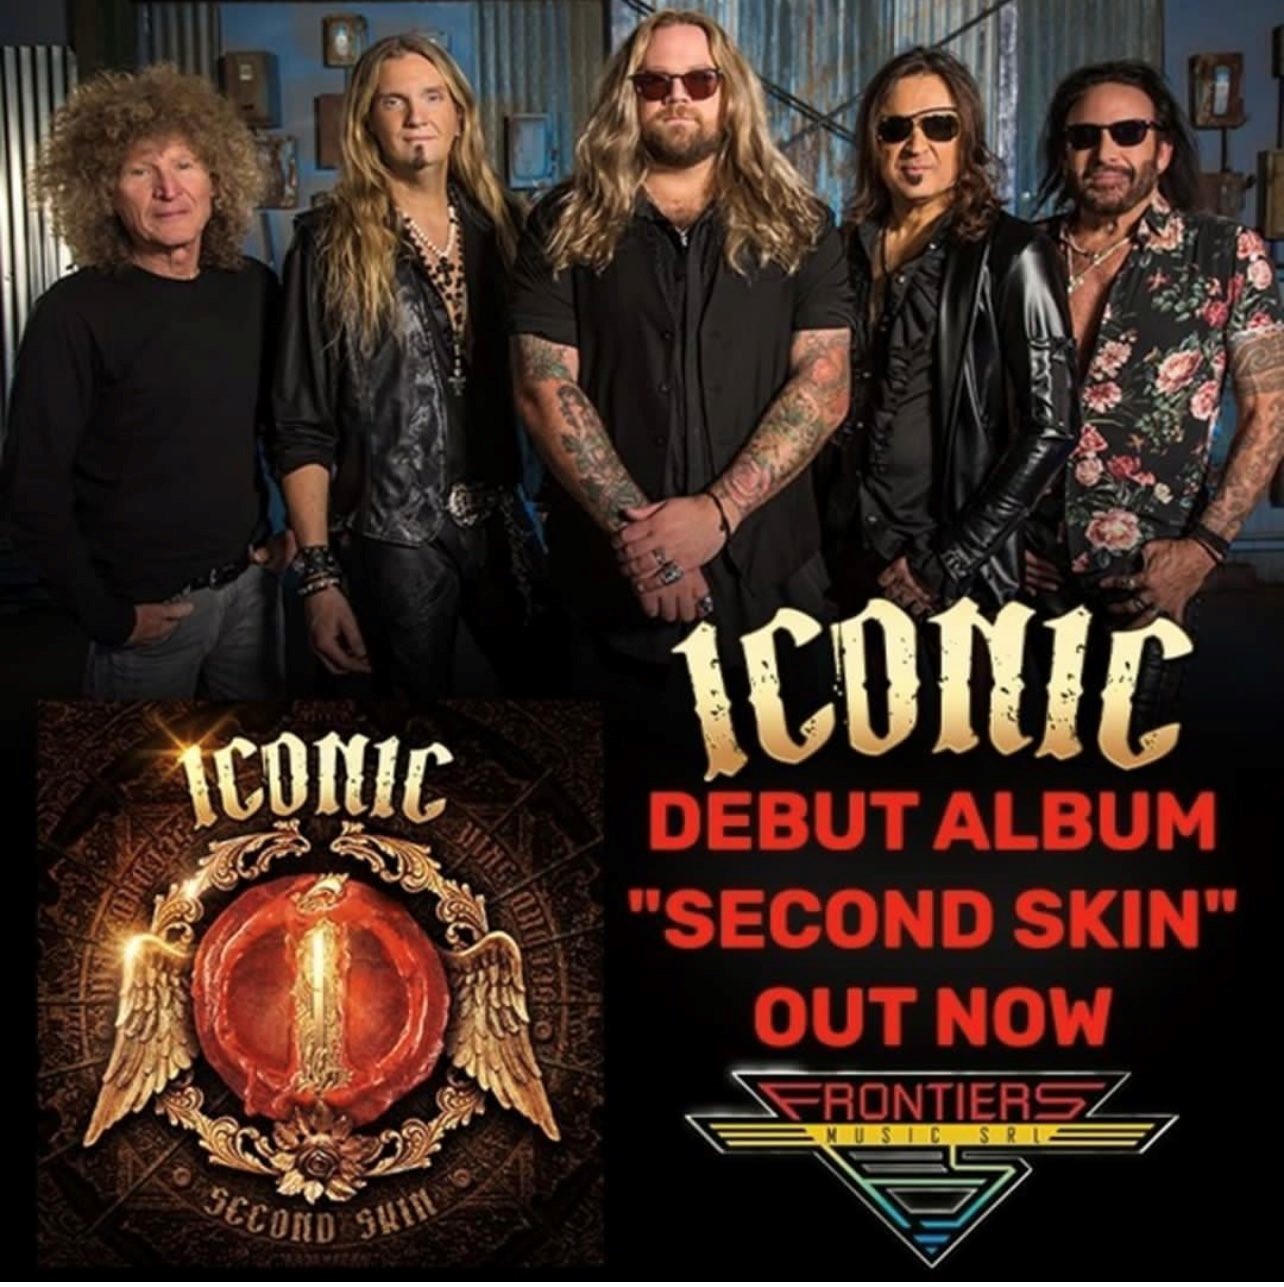 ICONIC released its debut album, Second Skin, on June 17